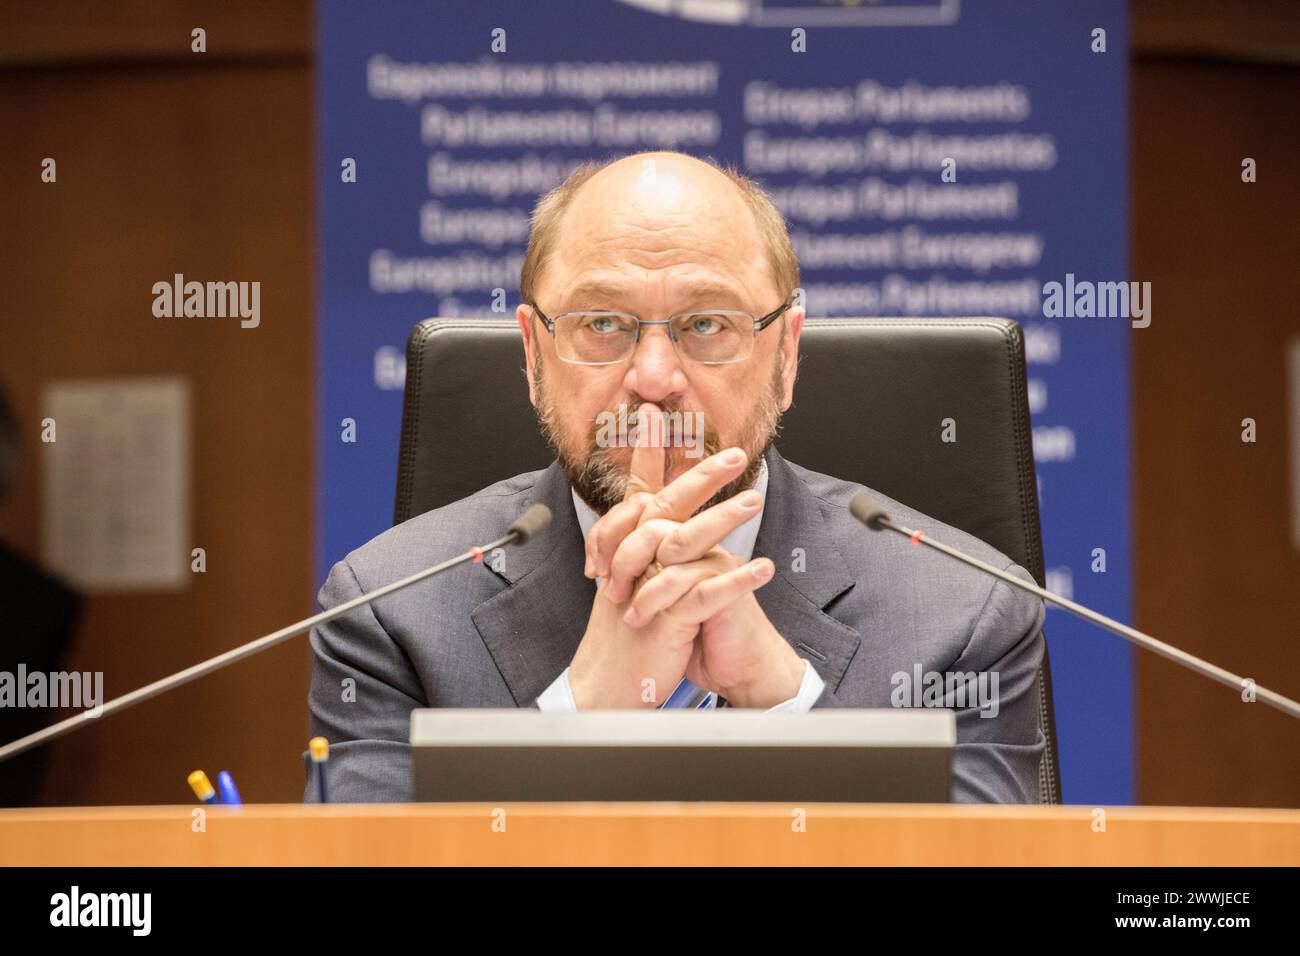 Chairman EuroPar European Parliamant, Brussels. The German Chairman of the European Parliament, Mr. Martin Schulz, in his seat, during the plenary sitting of February 24, 2016. Mr. Shulz is also a member of the Sozialdemokratische Partei Deutschlands or SPD. Brussel European Parliamant, Place du Le Brussel Belgie Copyright: xGuidoxKoppesx Stock Photo